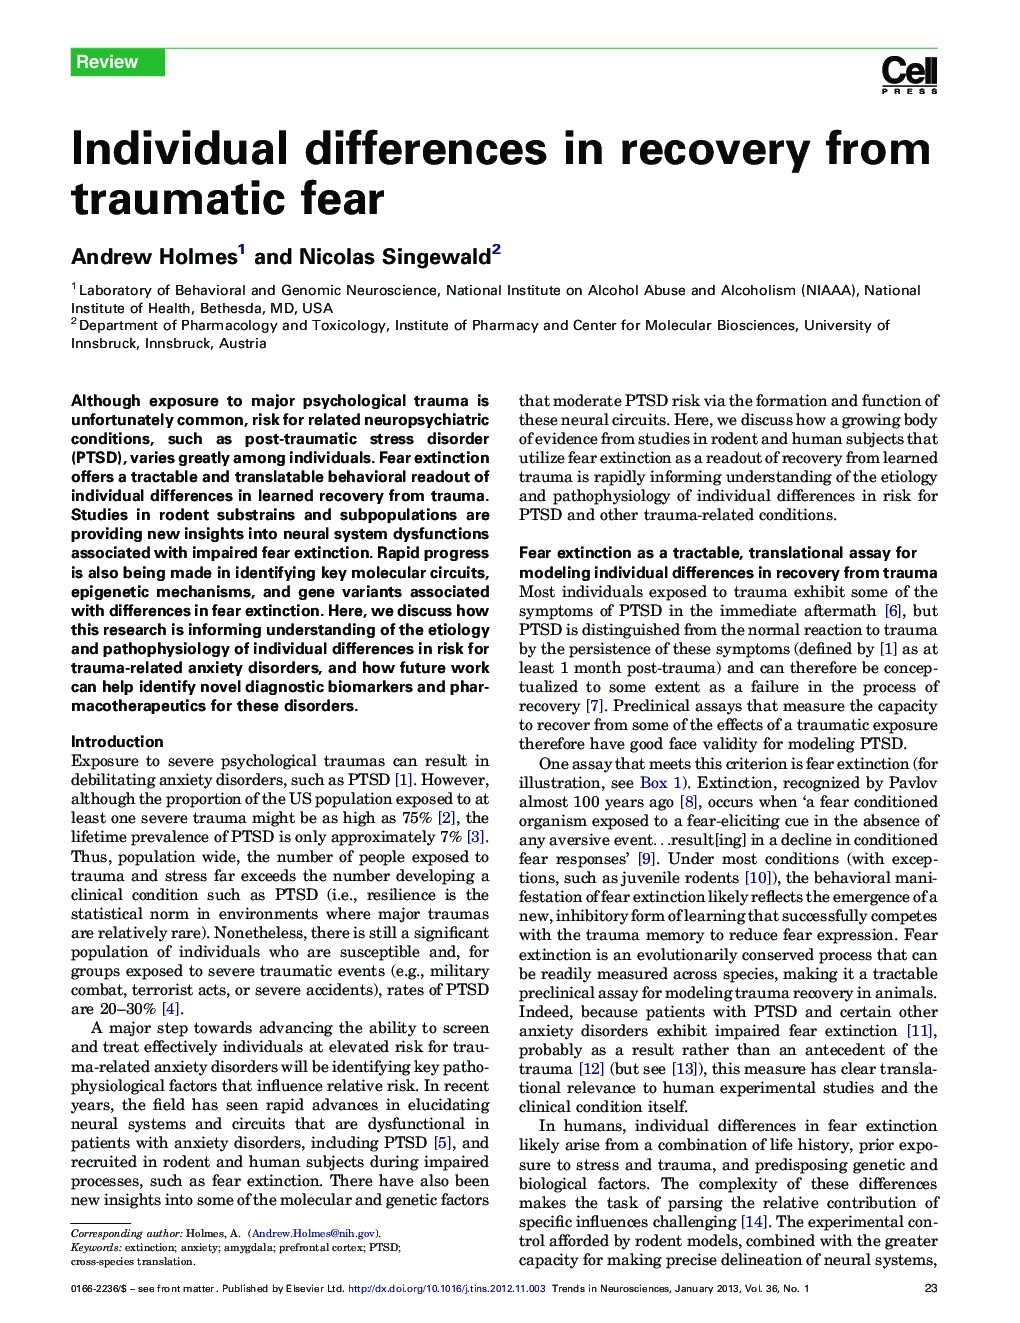 Individual differences in recovery from traumatic fear